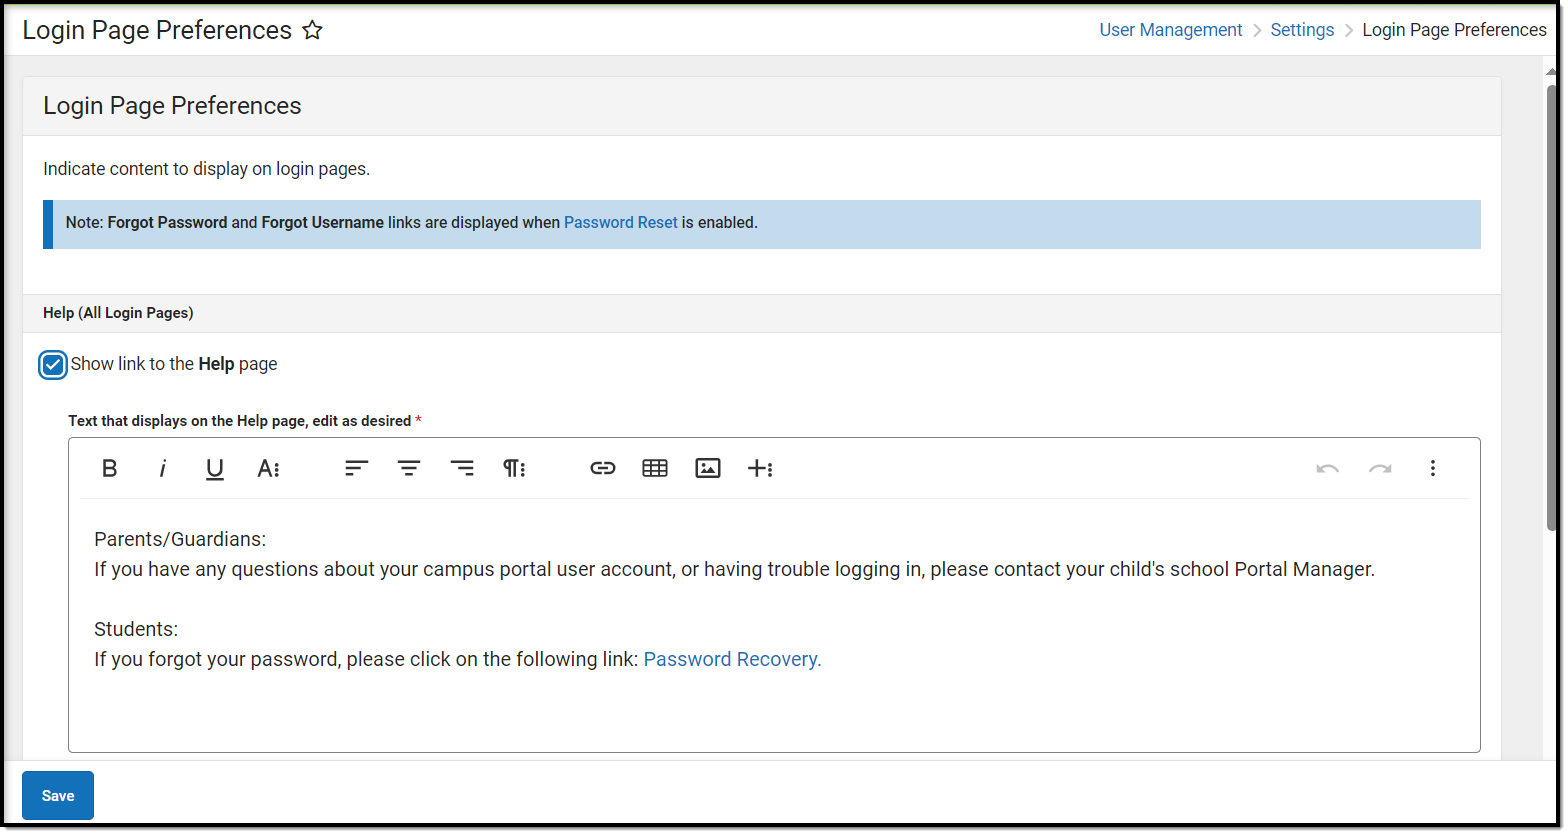 screenshot of the login page preferences tool